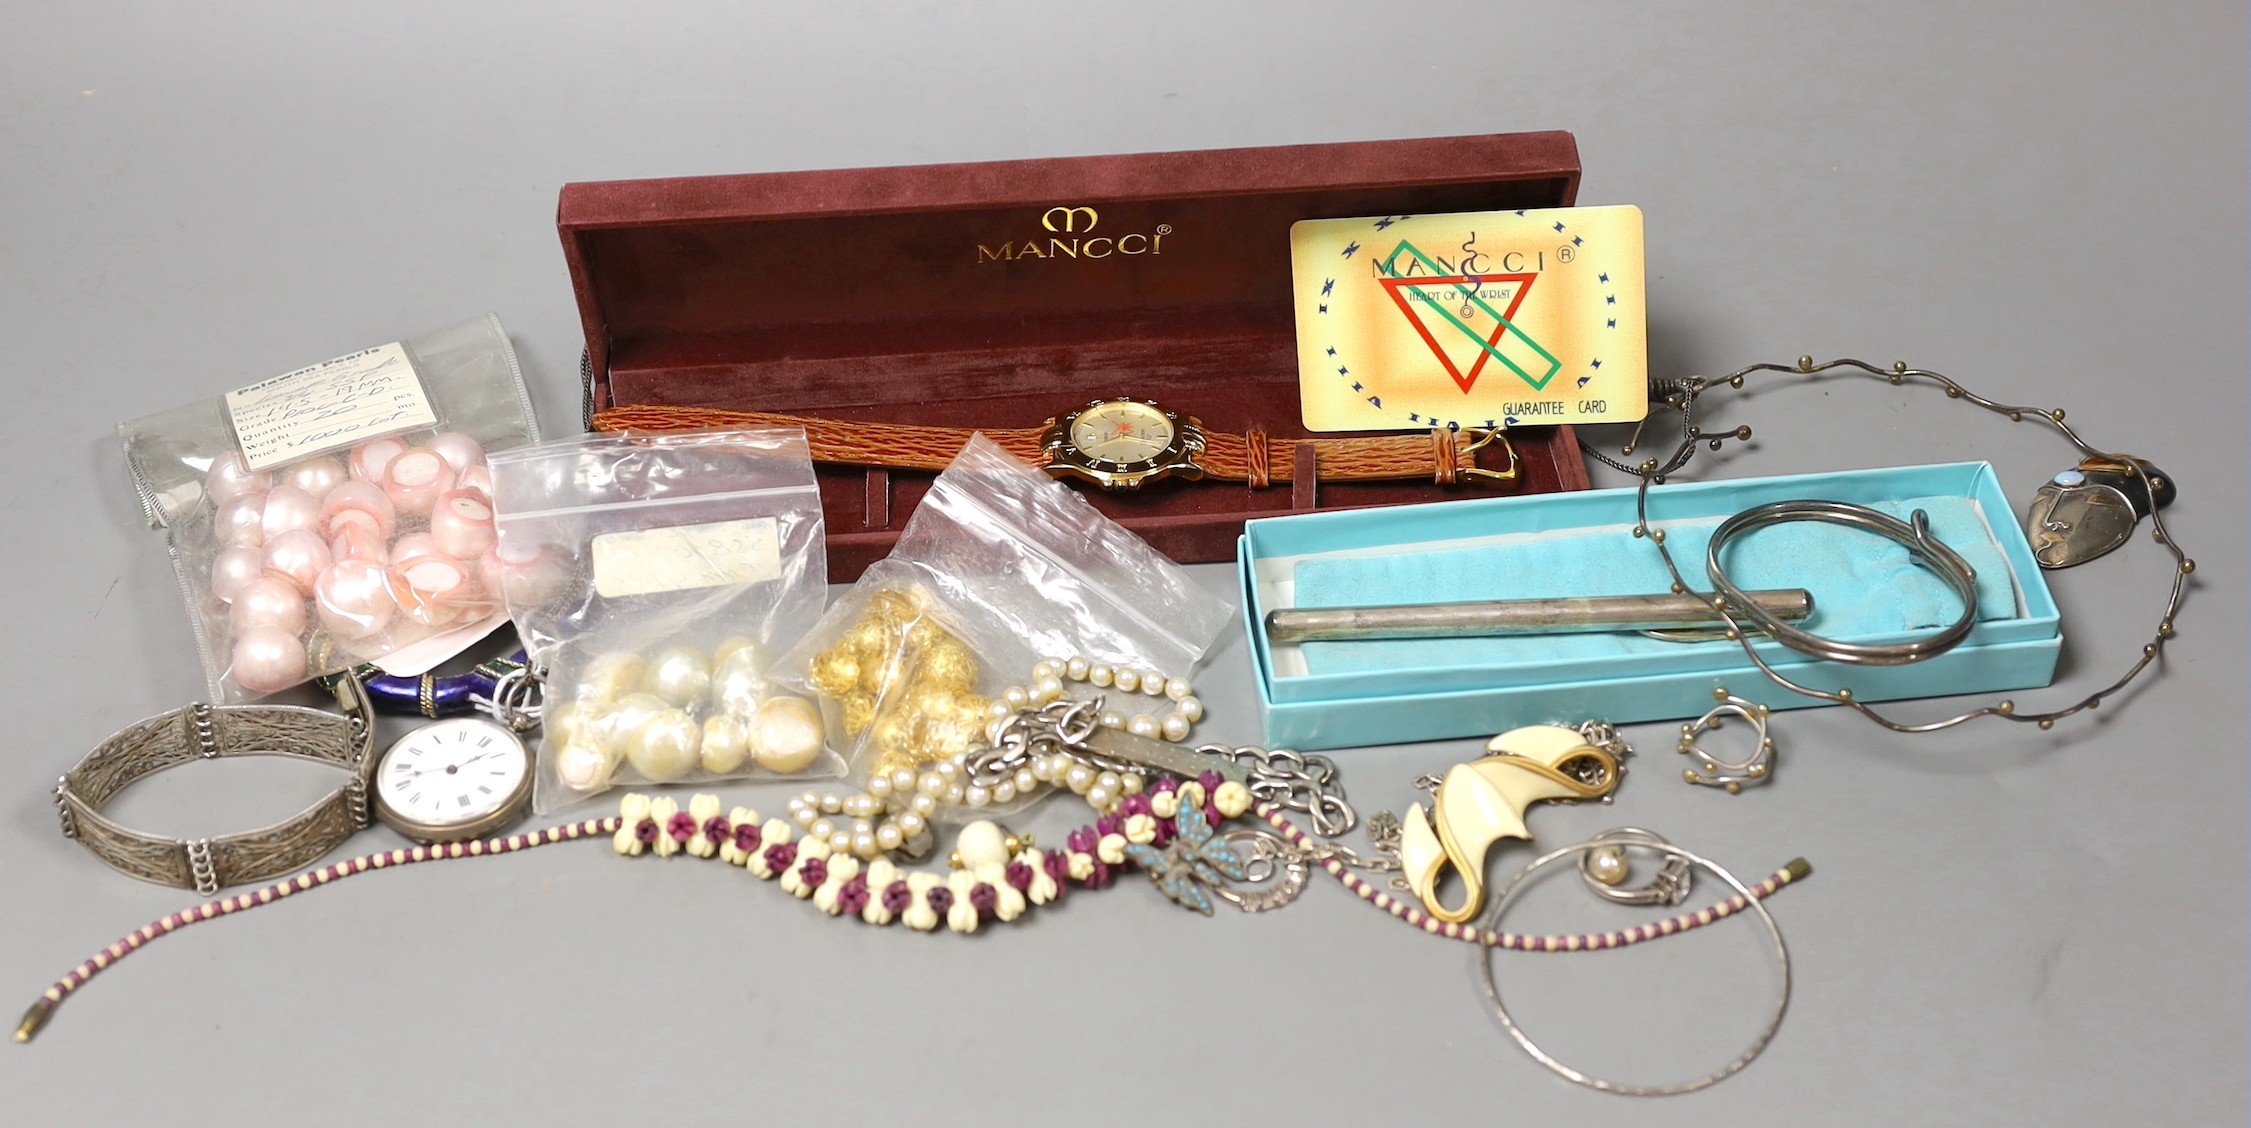 Mixed costume jewellery including filigree bracelet, bangles etc. and other items including two pens and a fob watch.